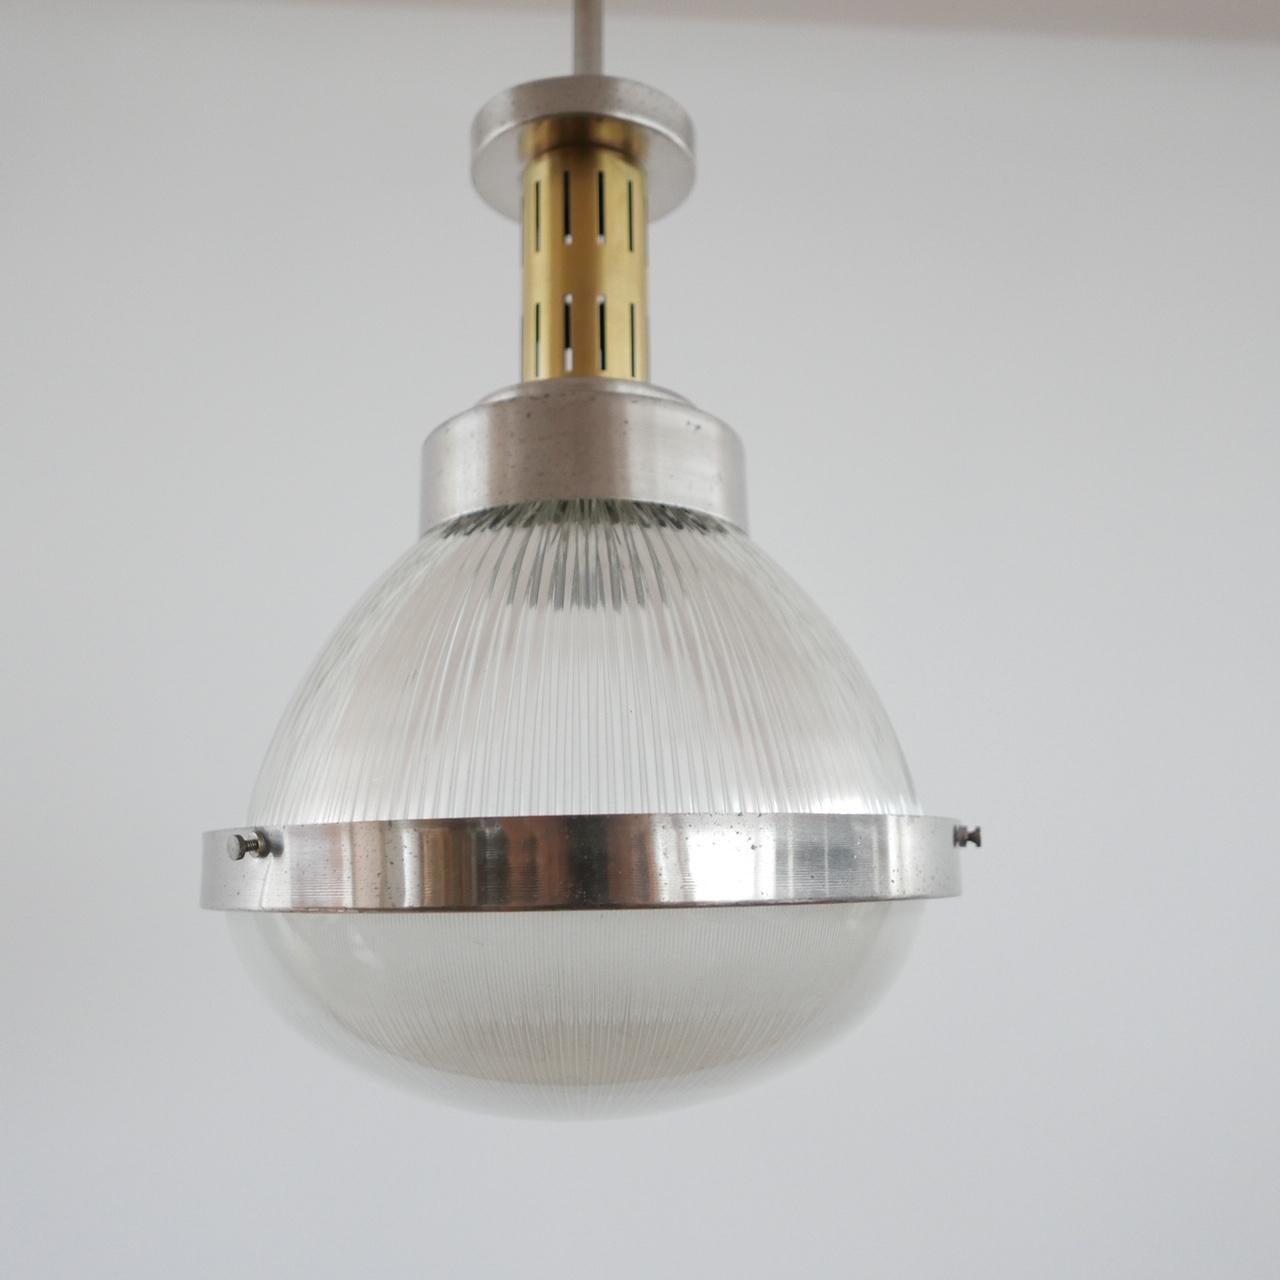 An Italian midcentury pendant light.

Attributed to Ignazio Gardella,

circa 1960s.

Nickel-plated brass, brass and pressed glass

Dimensions: Total height 90 height x 50 height (without rod) x 40 diameter in cm.

  